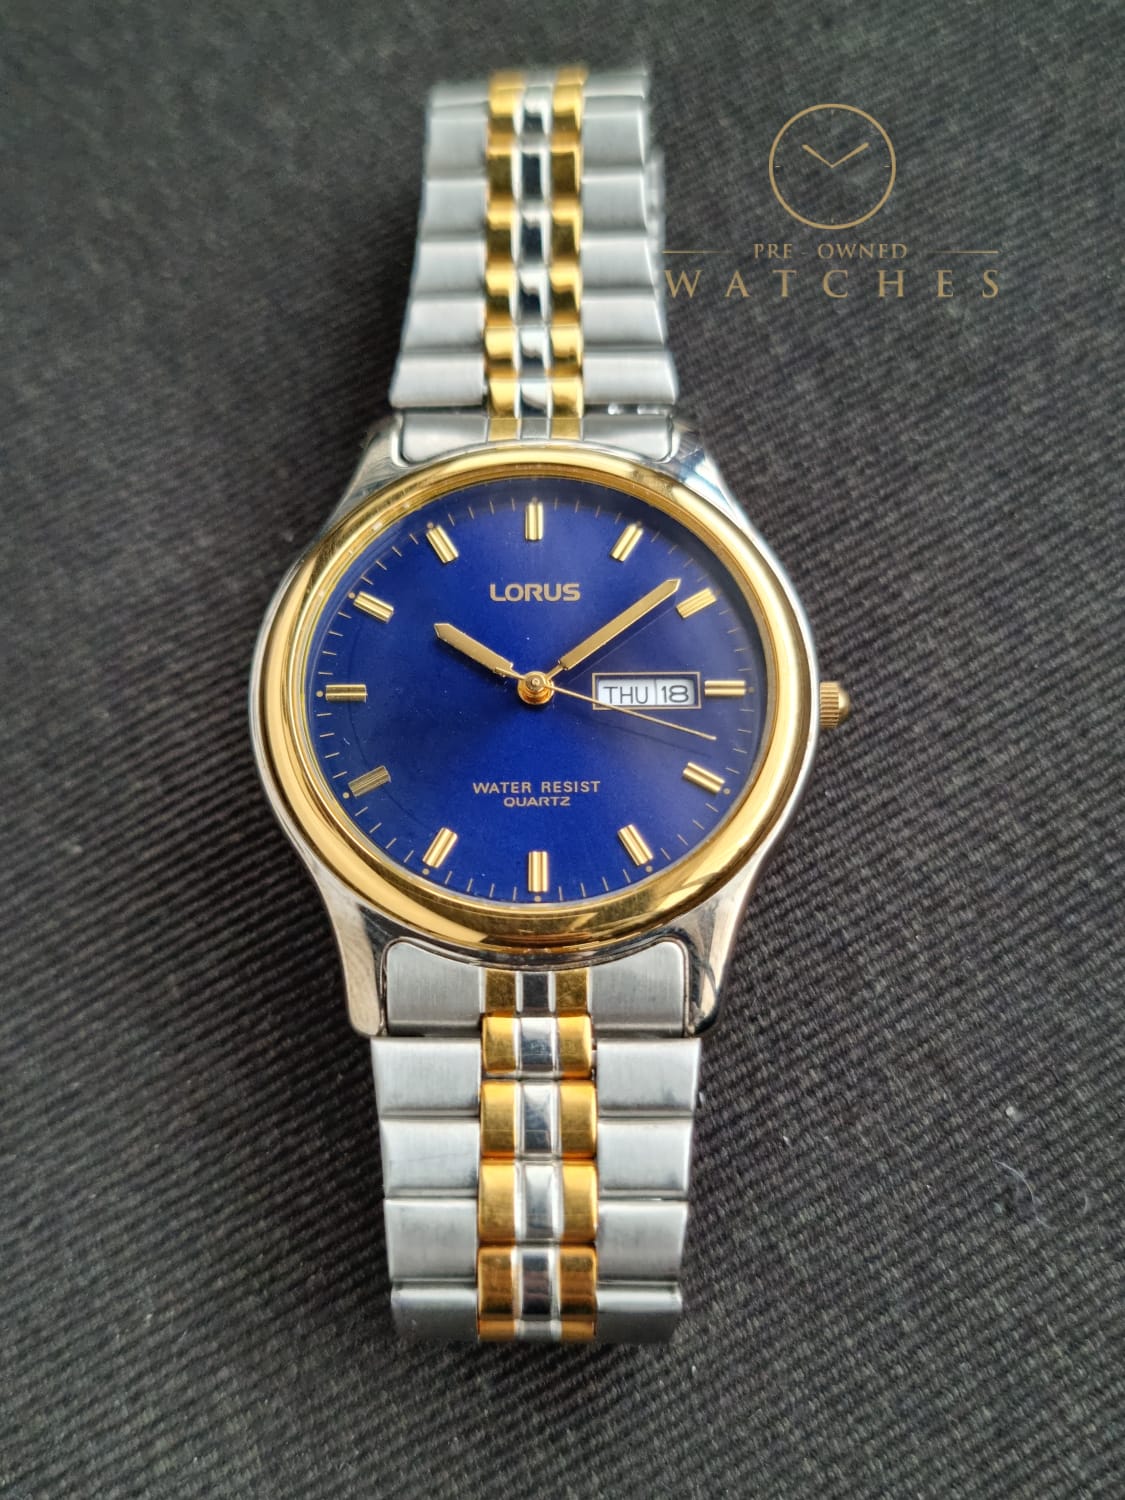 Lorus Sub Brand Of Seiko Two TOne Gents Watch Blue dial